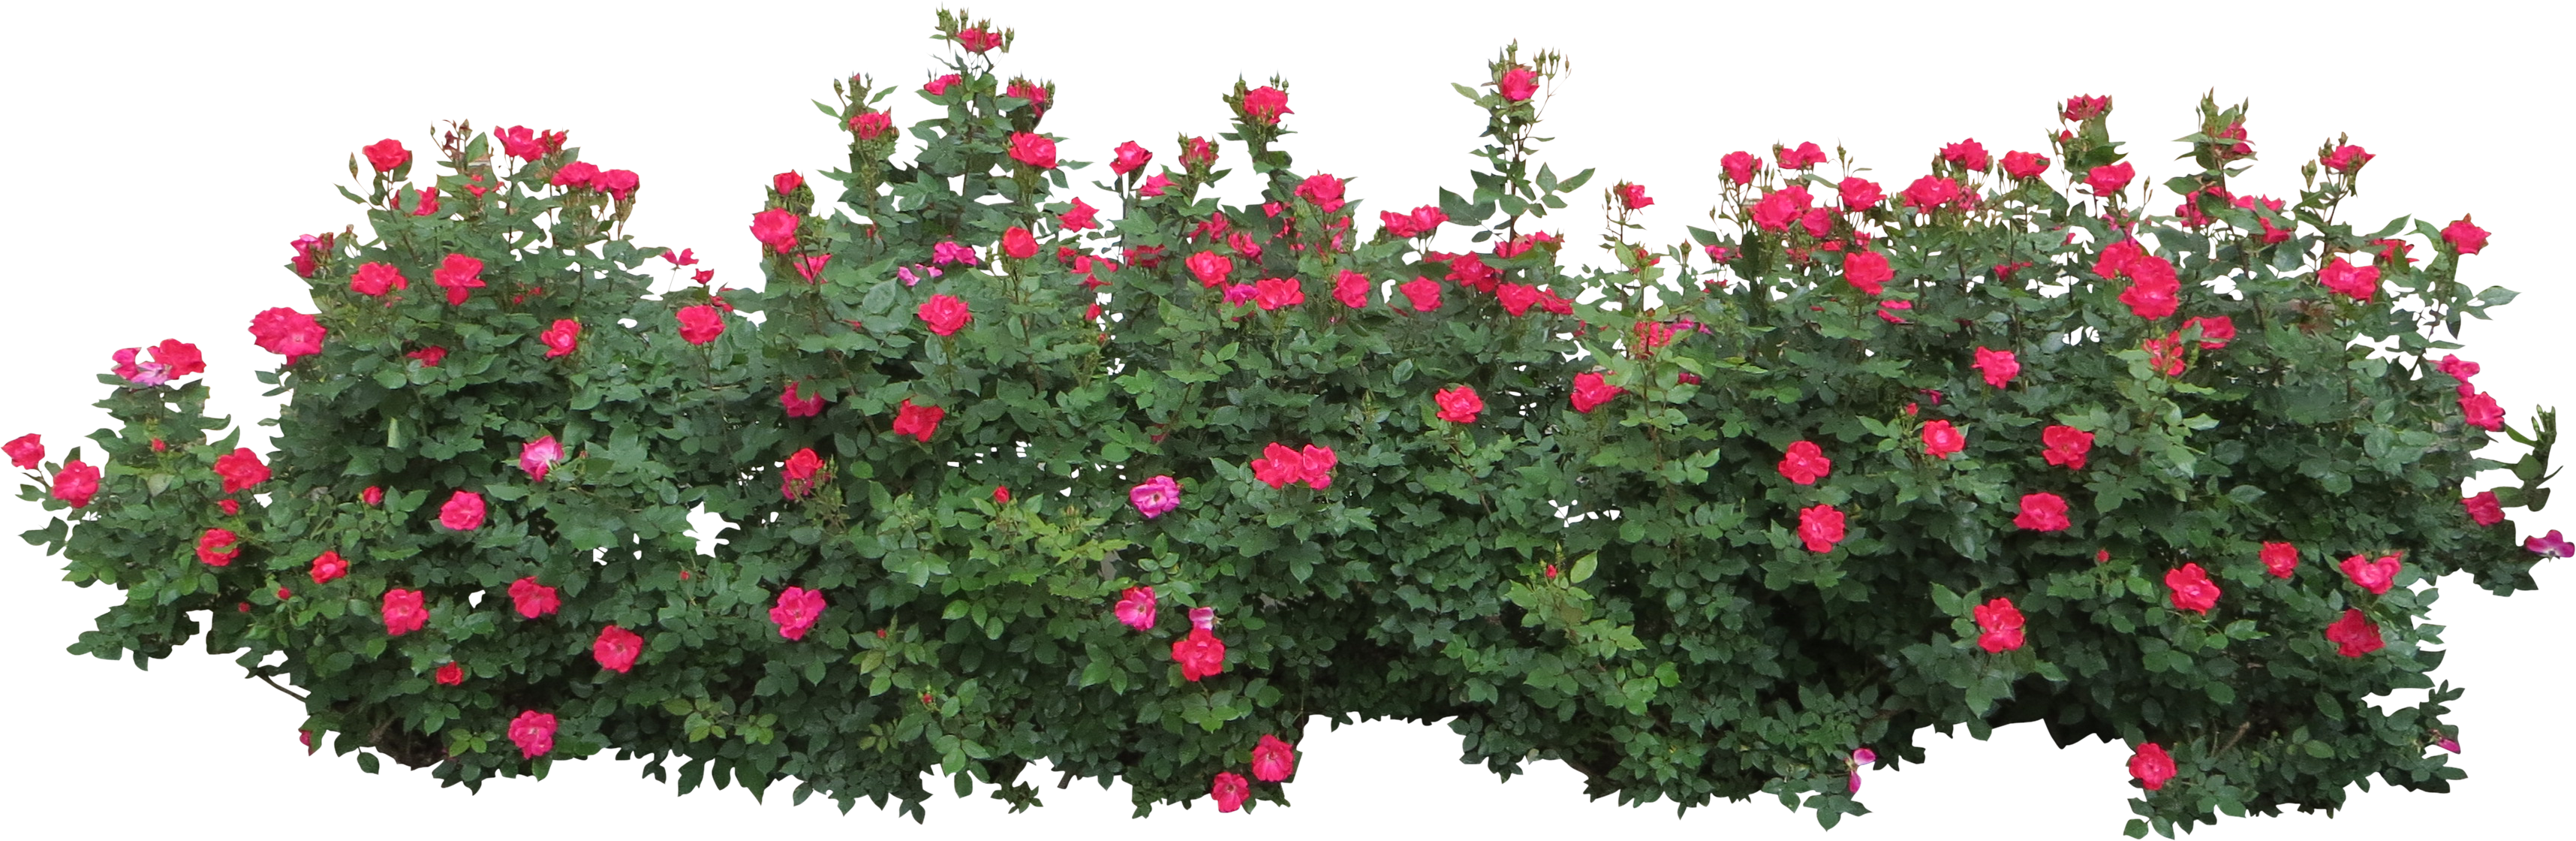 Bushes Rose Flower Shrub Free Download PNG HD Clipart